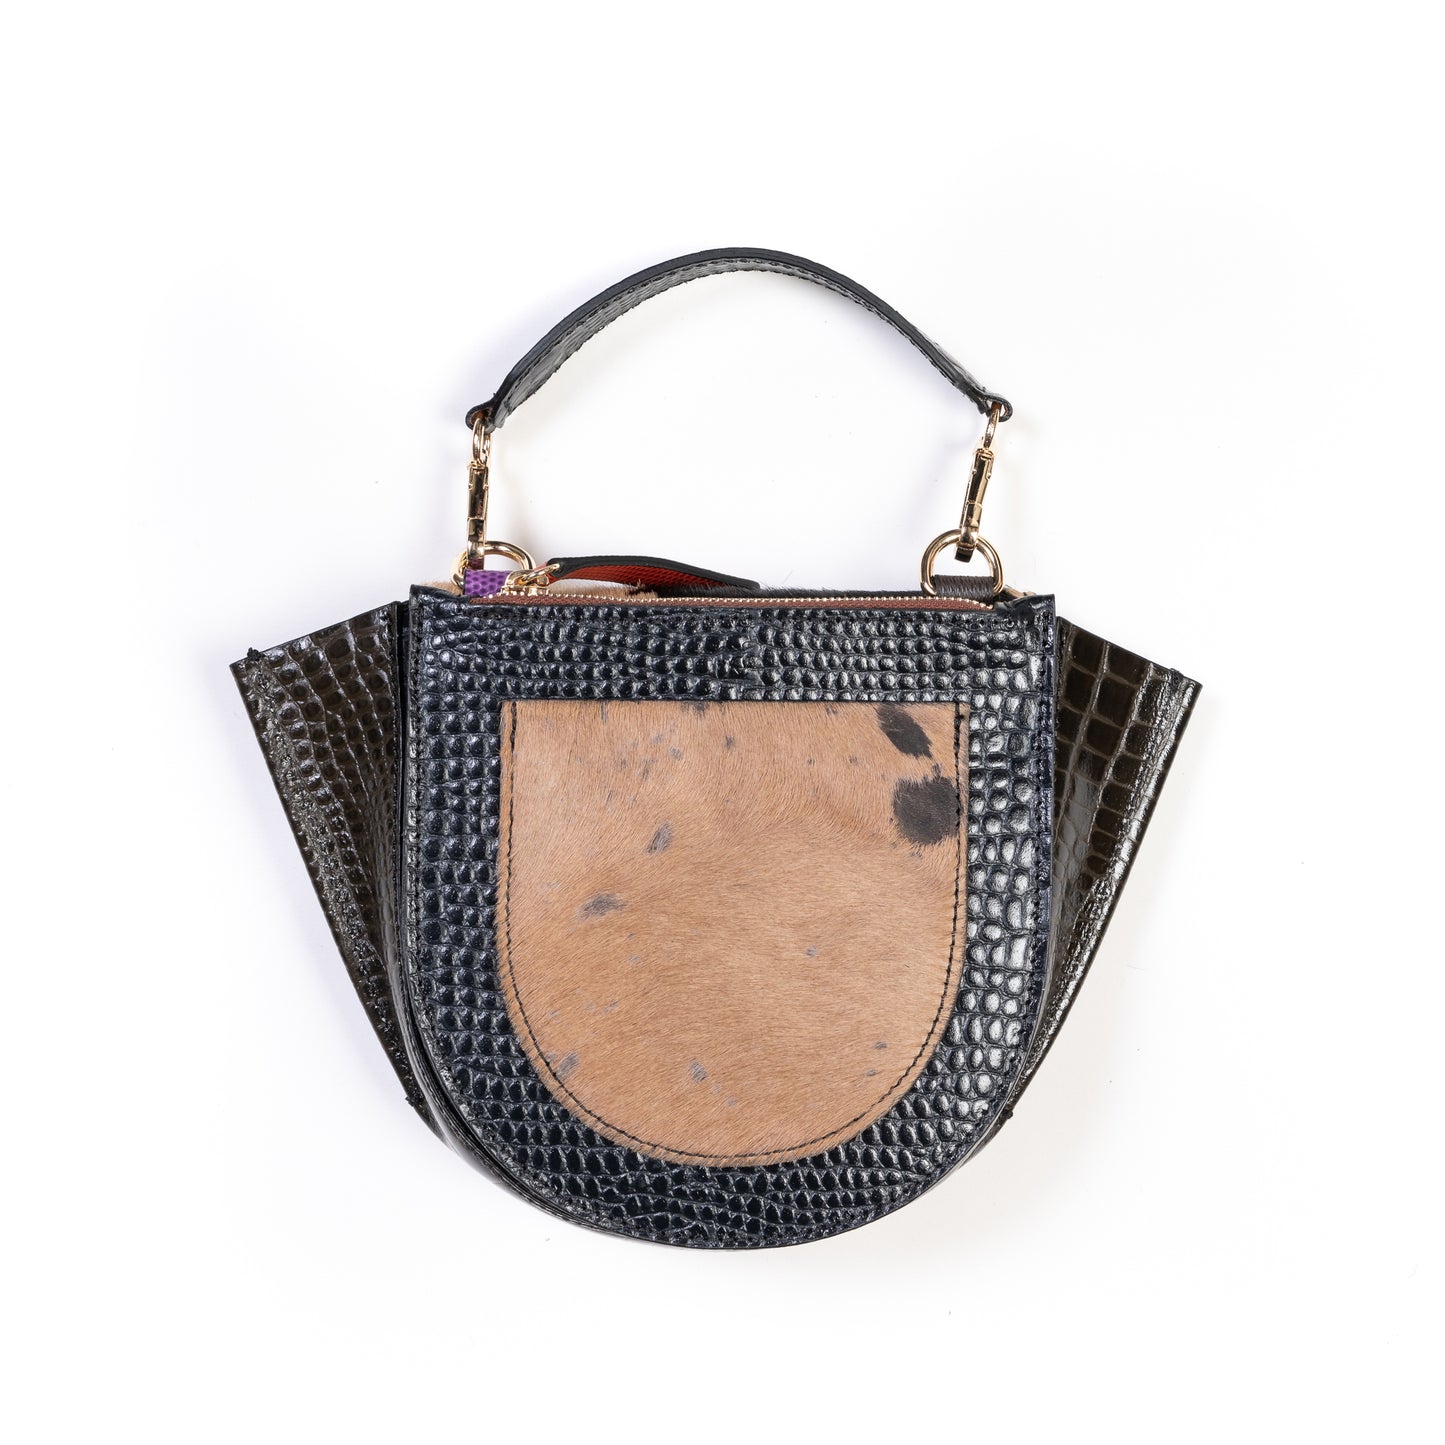 Real Leather Patching Small Saddle Grab Bag - Amilu